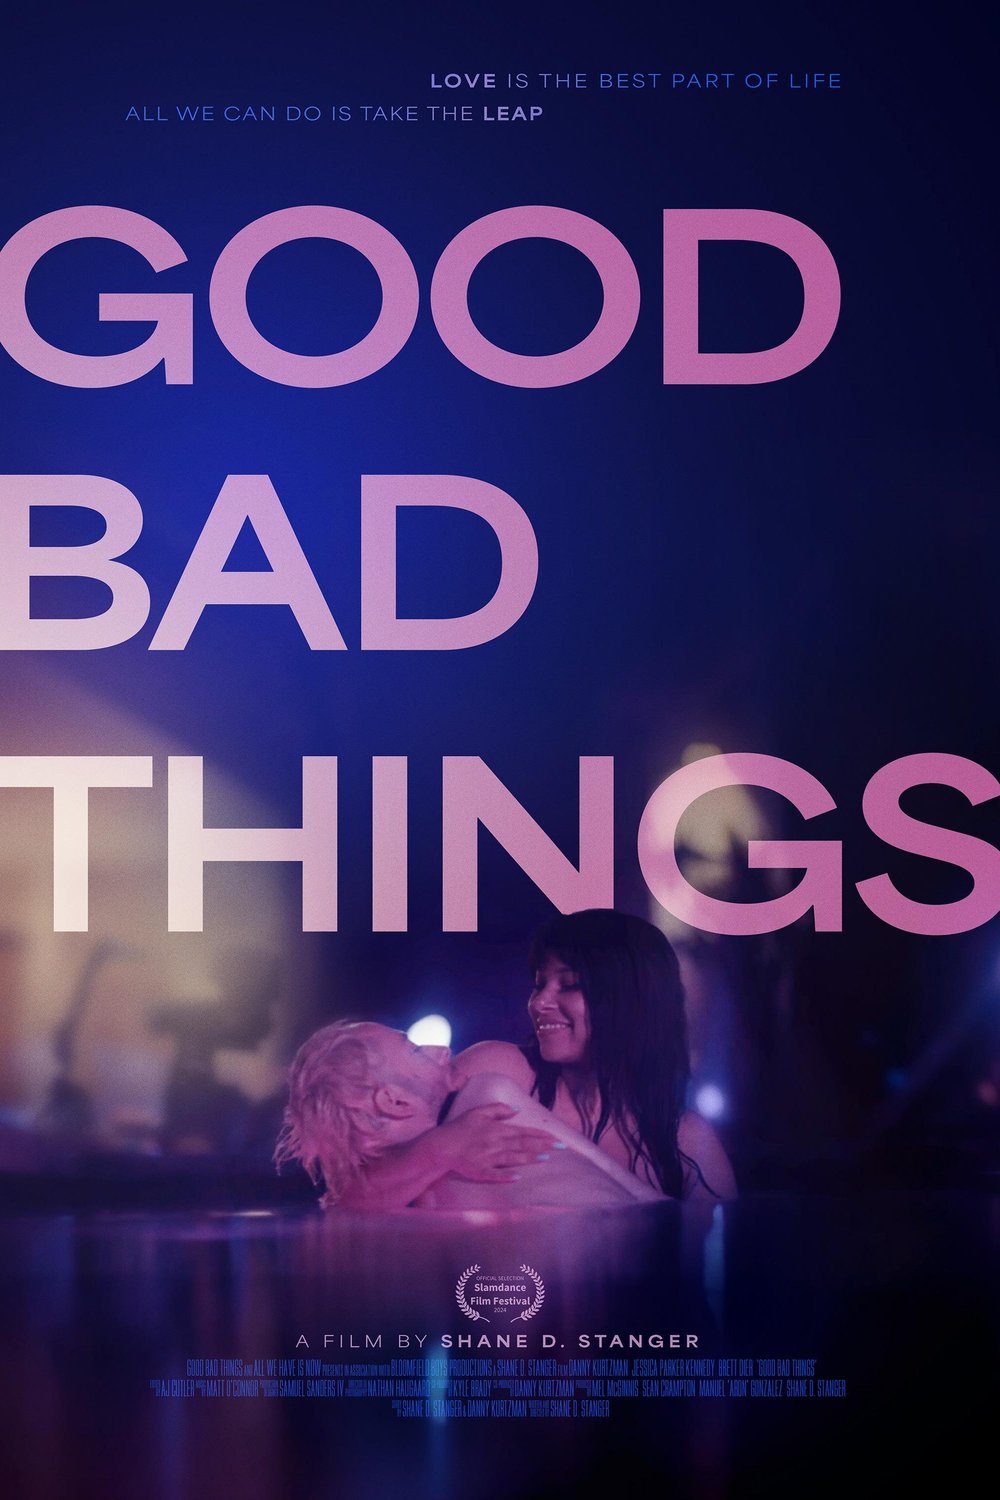 Poster of the movie Good Bad Things